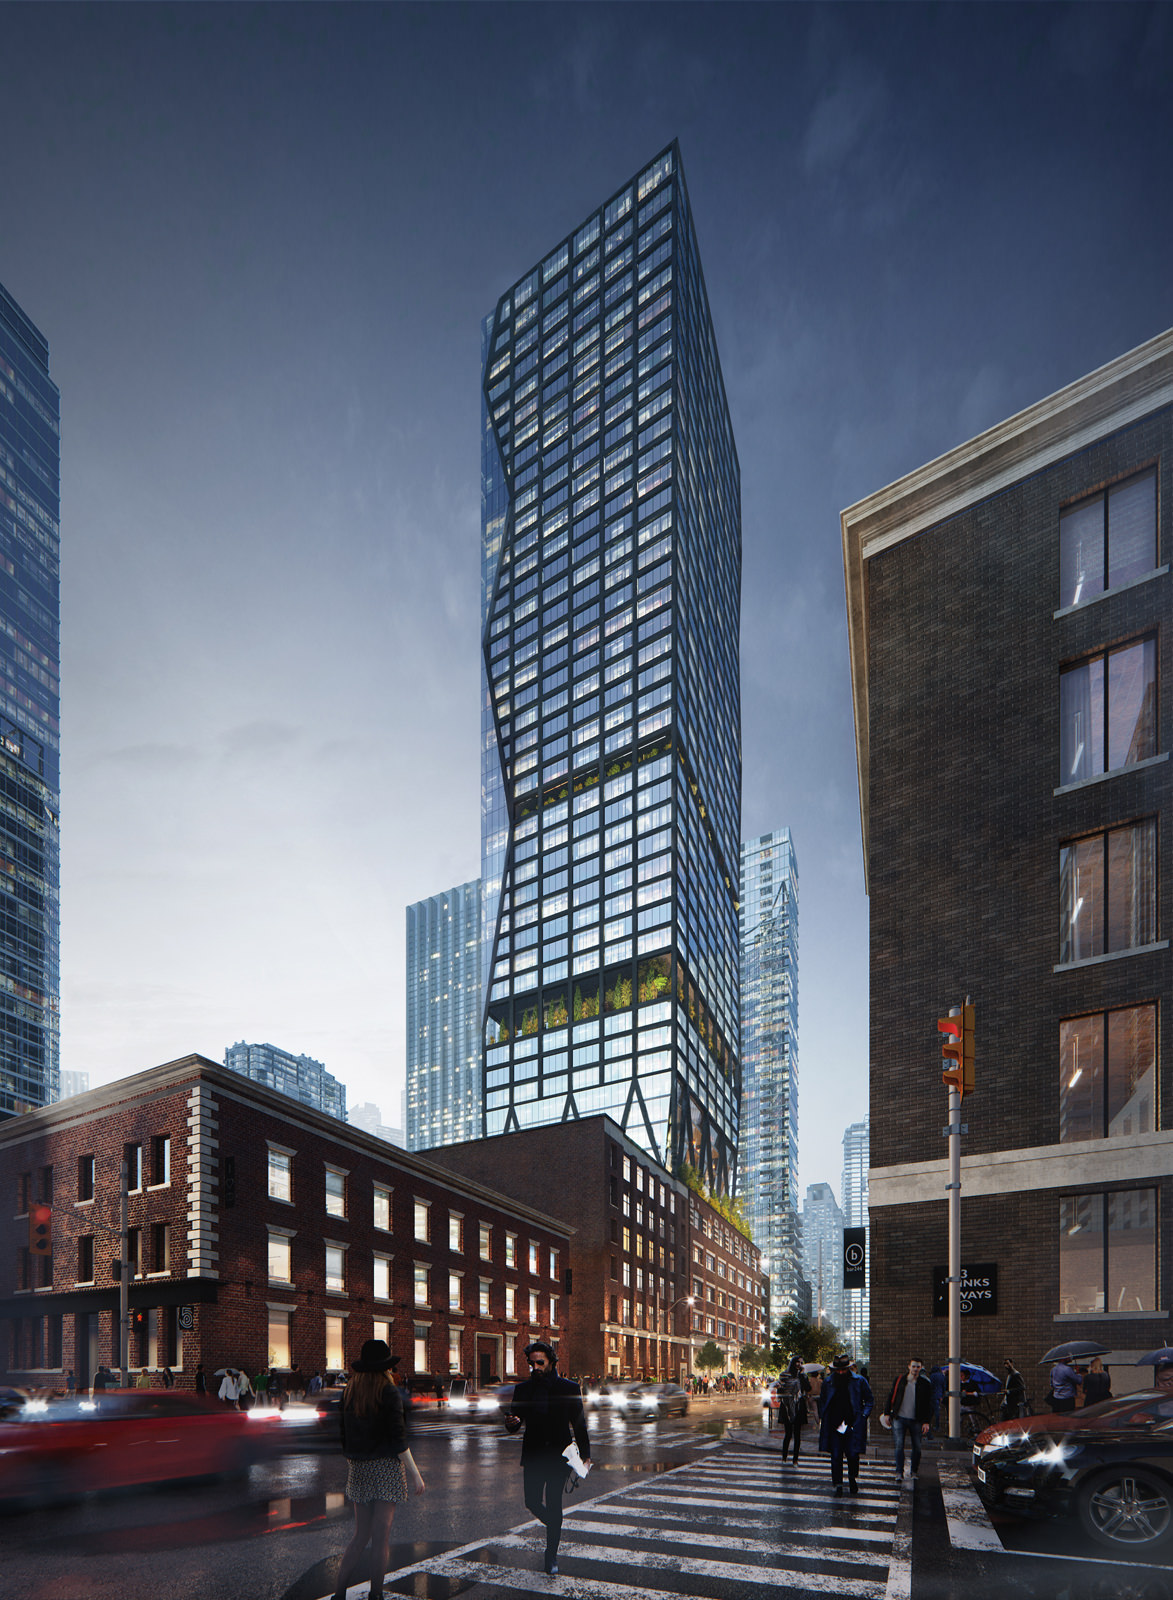 Lunas studio portfolio includes exterior 3D rendering of a Toronto skyscraper in Canada, flanked with historic buildings, visualized from eye level with pedestrians crossing the street in the view